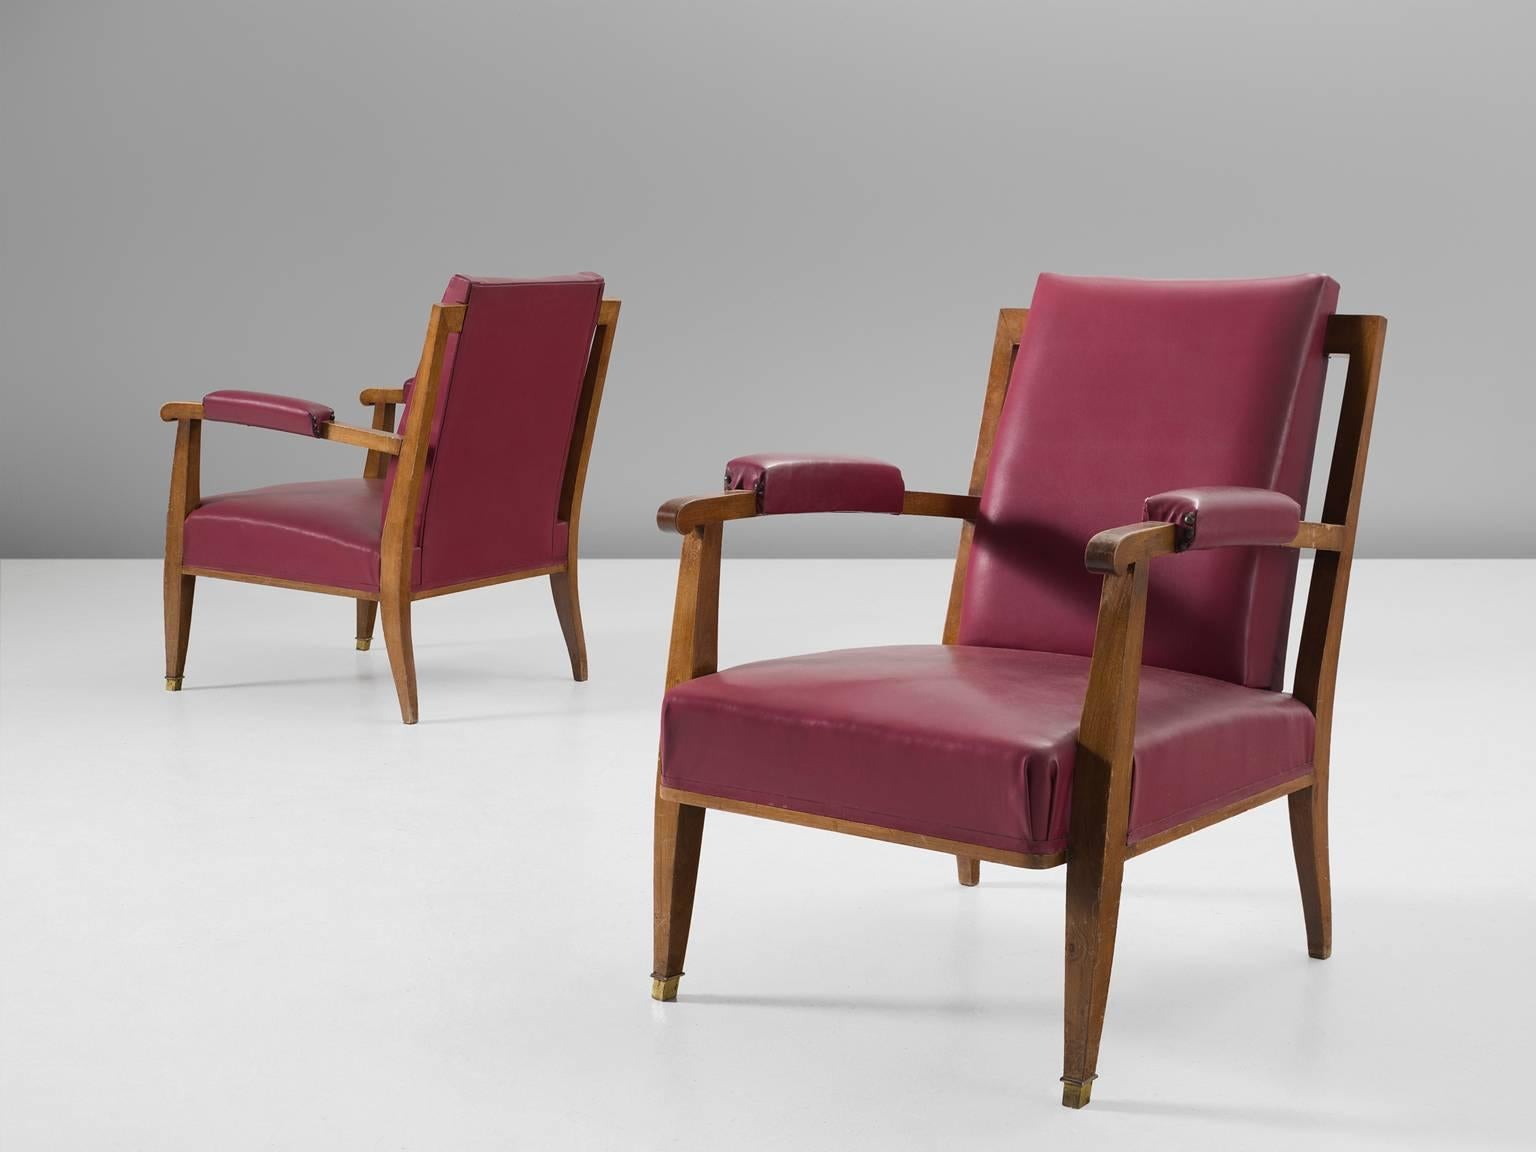 Pair of armchairs by Jules Leleu, in Italian walnut and skai, France, 1957.

This set of playful chairs are made out of solid oak and thick cushion upholstered with red to pink skai leather. The detailing is interesting in both the armrests and